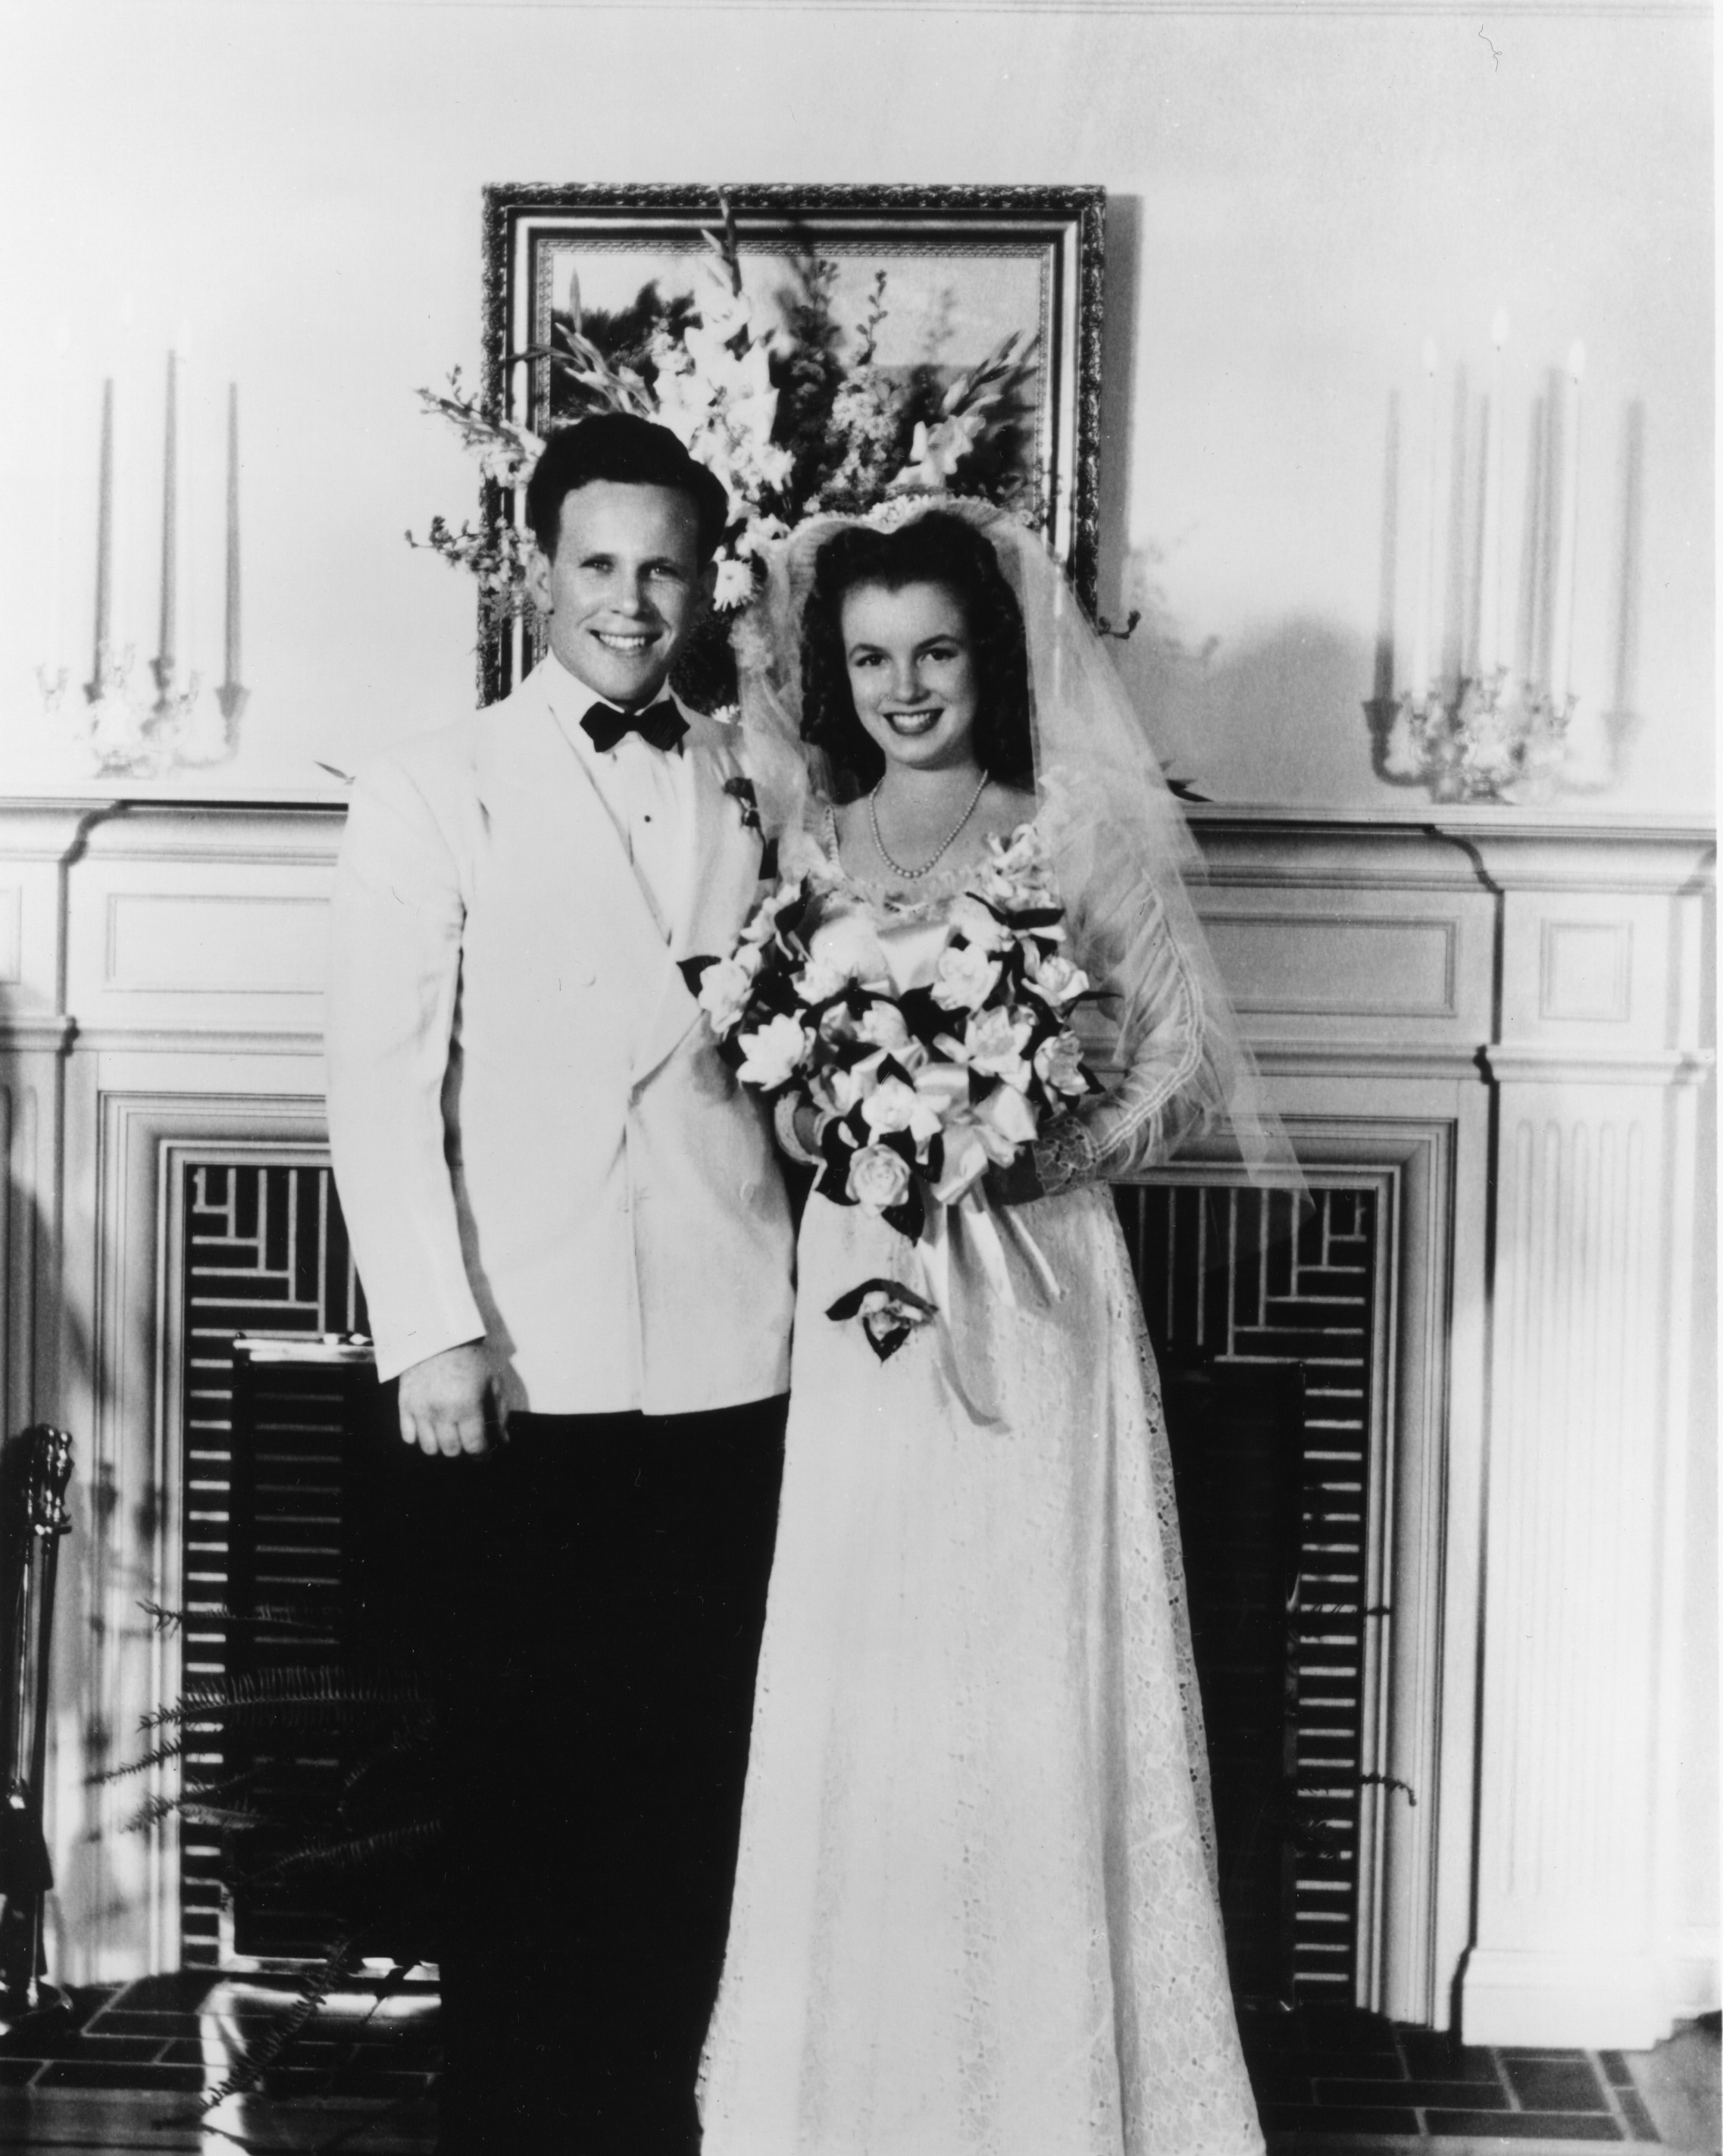 Bride in a long gown and groom in a tuxedo standing together, smiling at their wedding